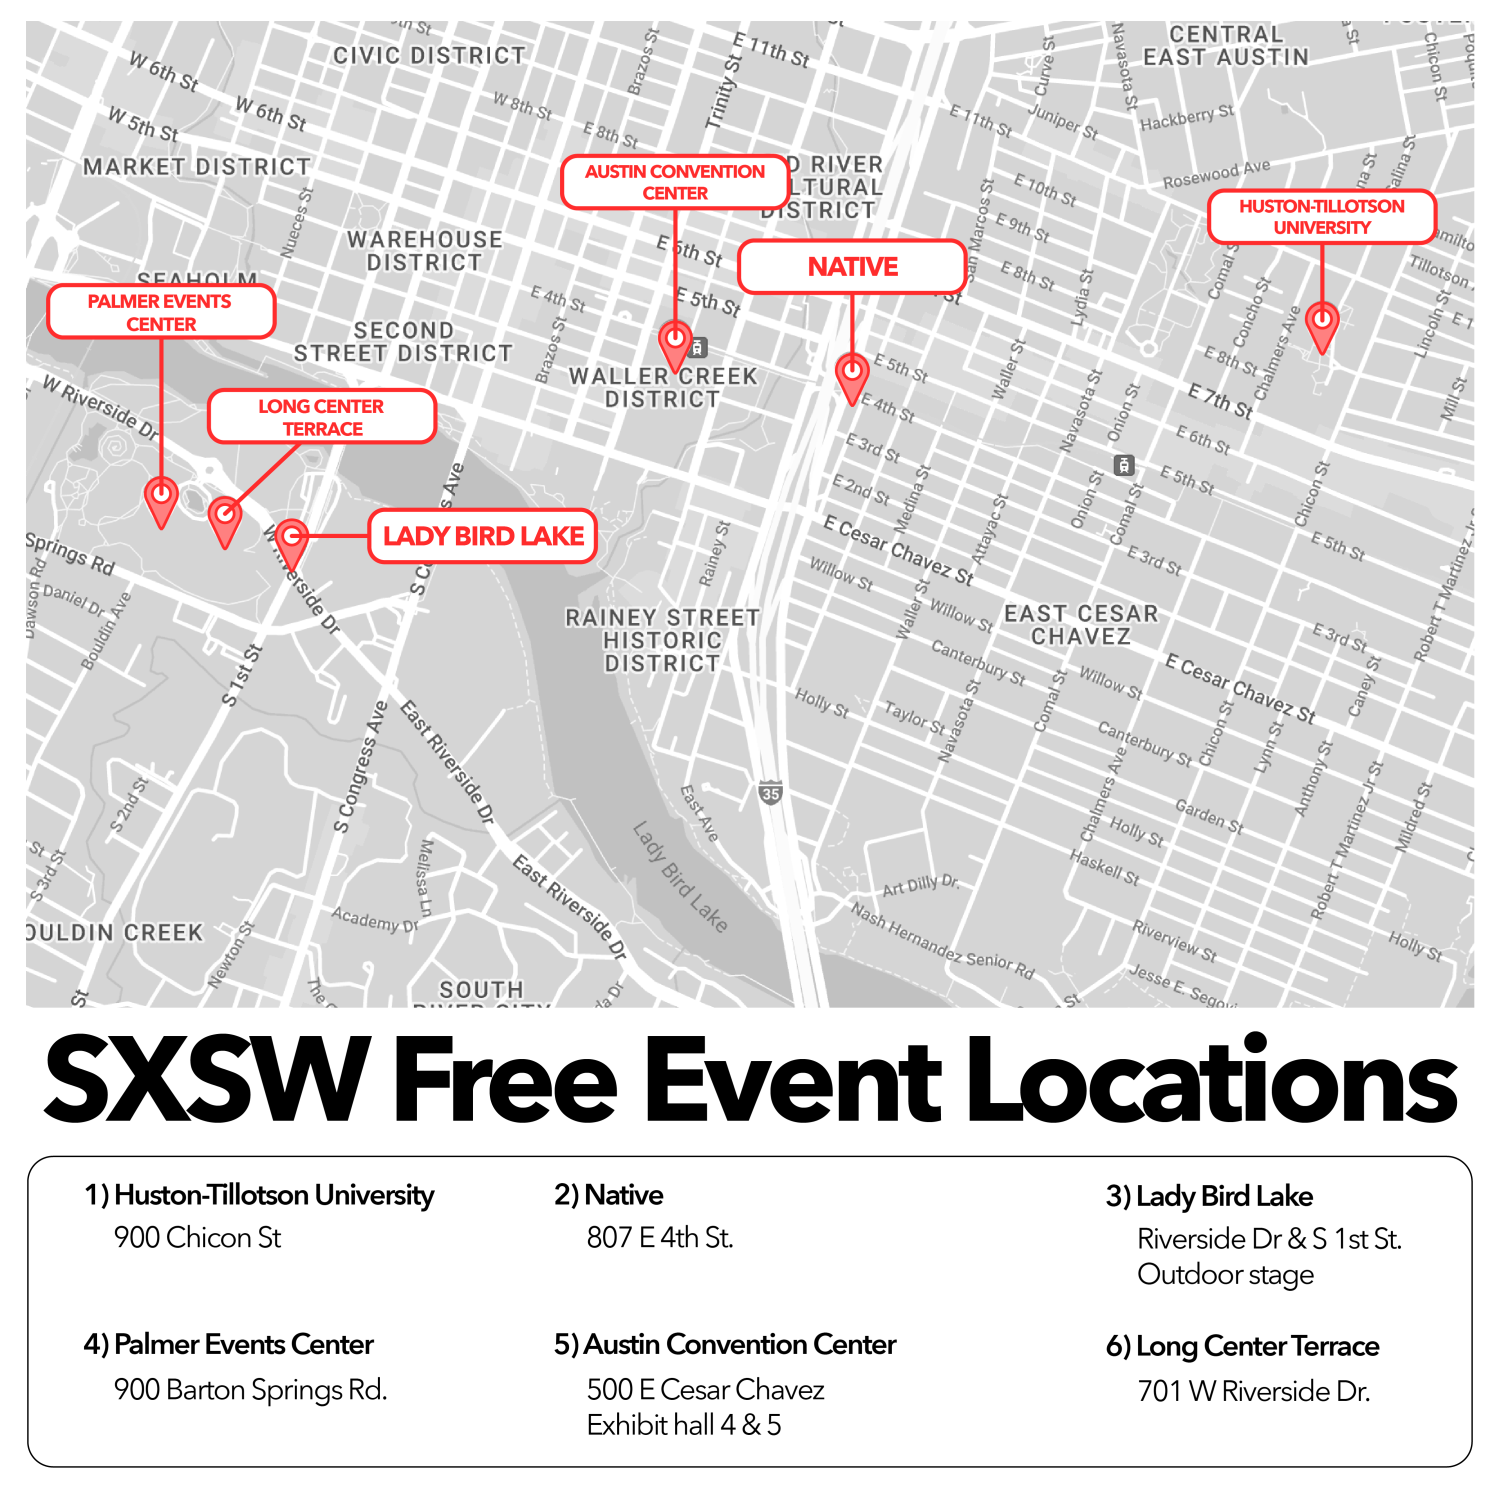 Festival freebies Here’s a list of free SXSW events The Daily Texan